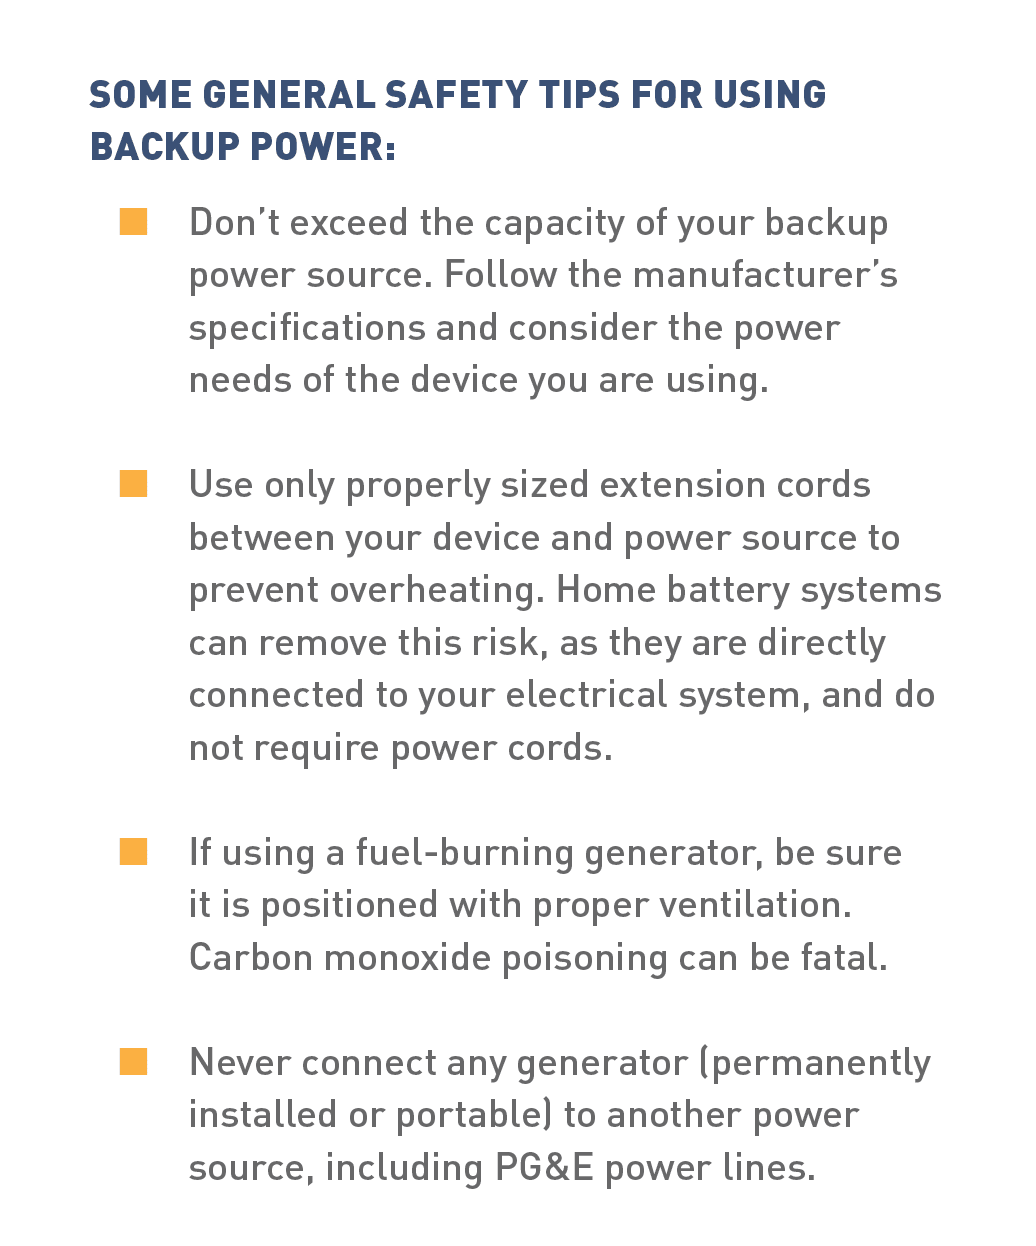 SOME GENERAL SAFETY TIPS FOR USING BACKUP POWER:      A. Don’t exceed the capacity of your backup power source. Follow the manufacturer’s specifications and consider the power needs of the device you are using.      B.Use only properly sized extension cords between your device and power source to prevent overheating. Home battery systems can remove this risk, as they are directly connected to your electrical system, and do not require power cords.      C. If using a fuel-burning generator, be sure it is positioned with proper ventilation. Carbon monoxide poisoning can be fatal. Never connect any generator (permanently installed or portable) to another power source, including PG&E power lines.